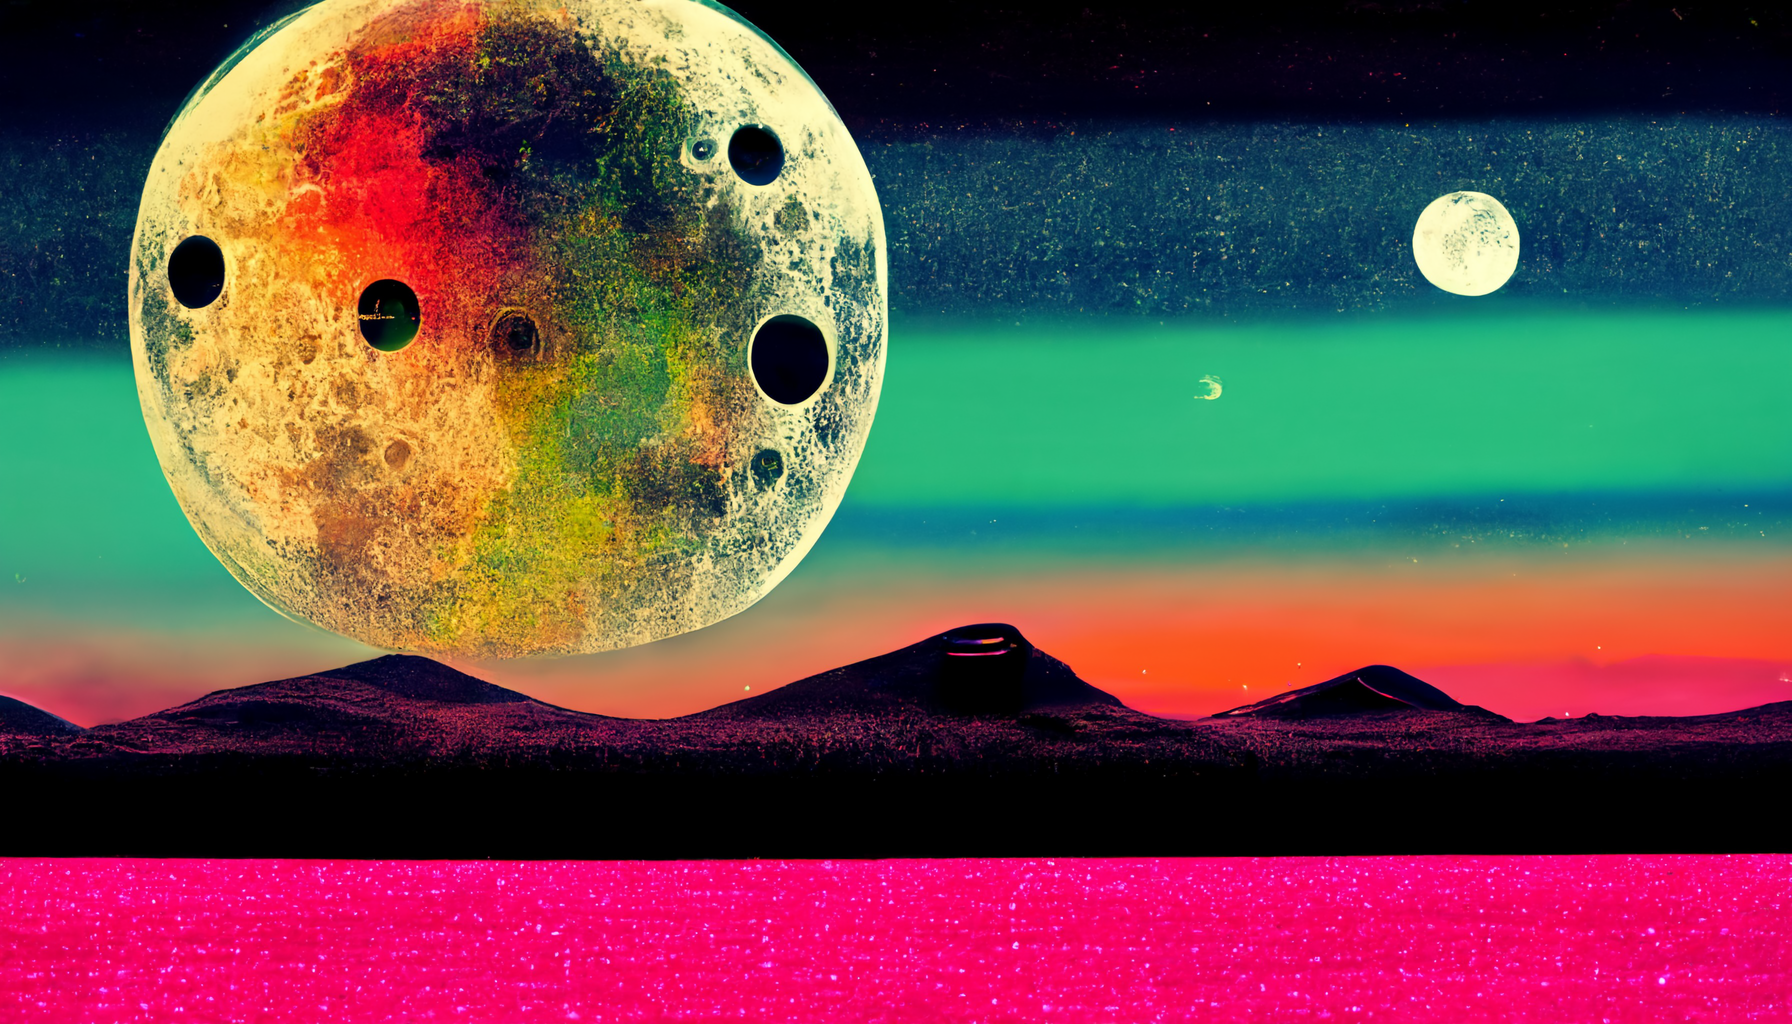 An AI-generated image of a dreamy 80s landscape with one giant moon in the foreground and one smaller moon in the background